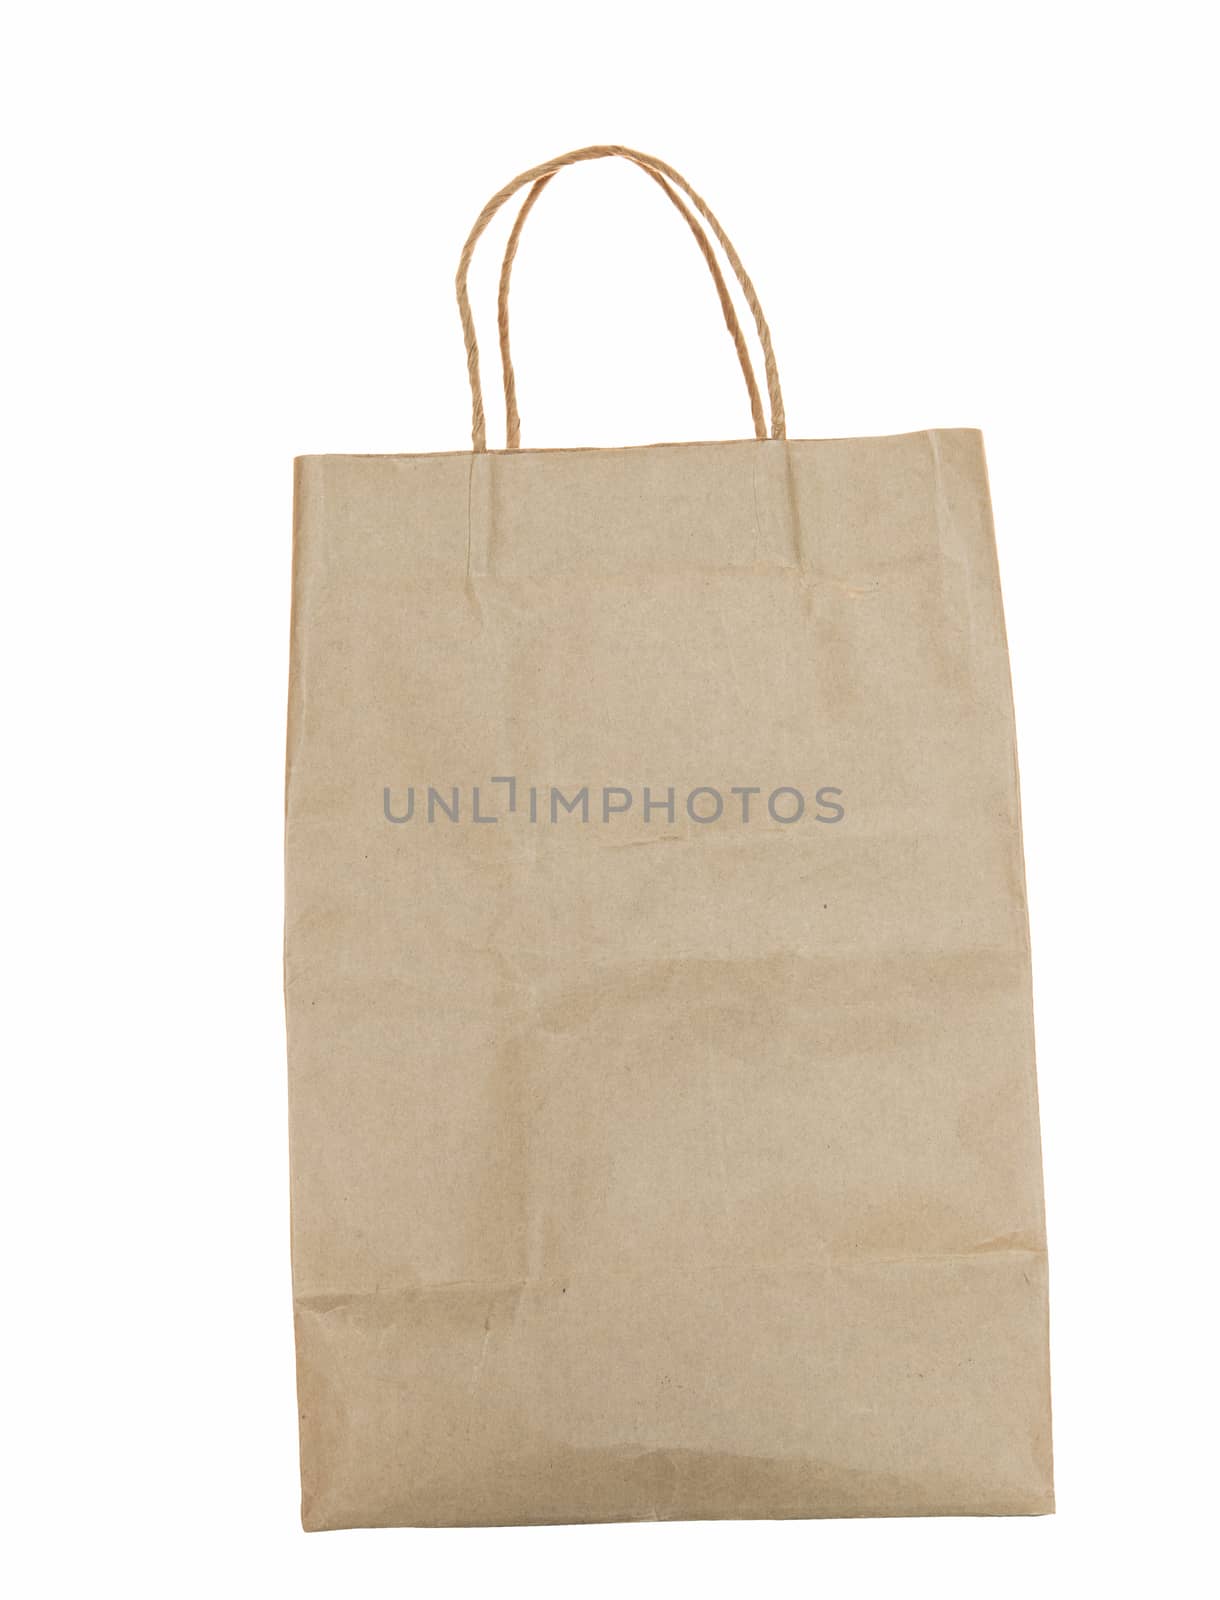 old used brown recycle paper shopping bag isolated object on whi by khunaspix